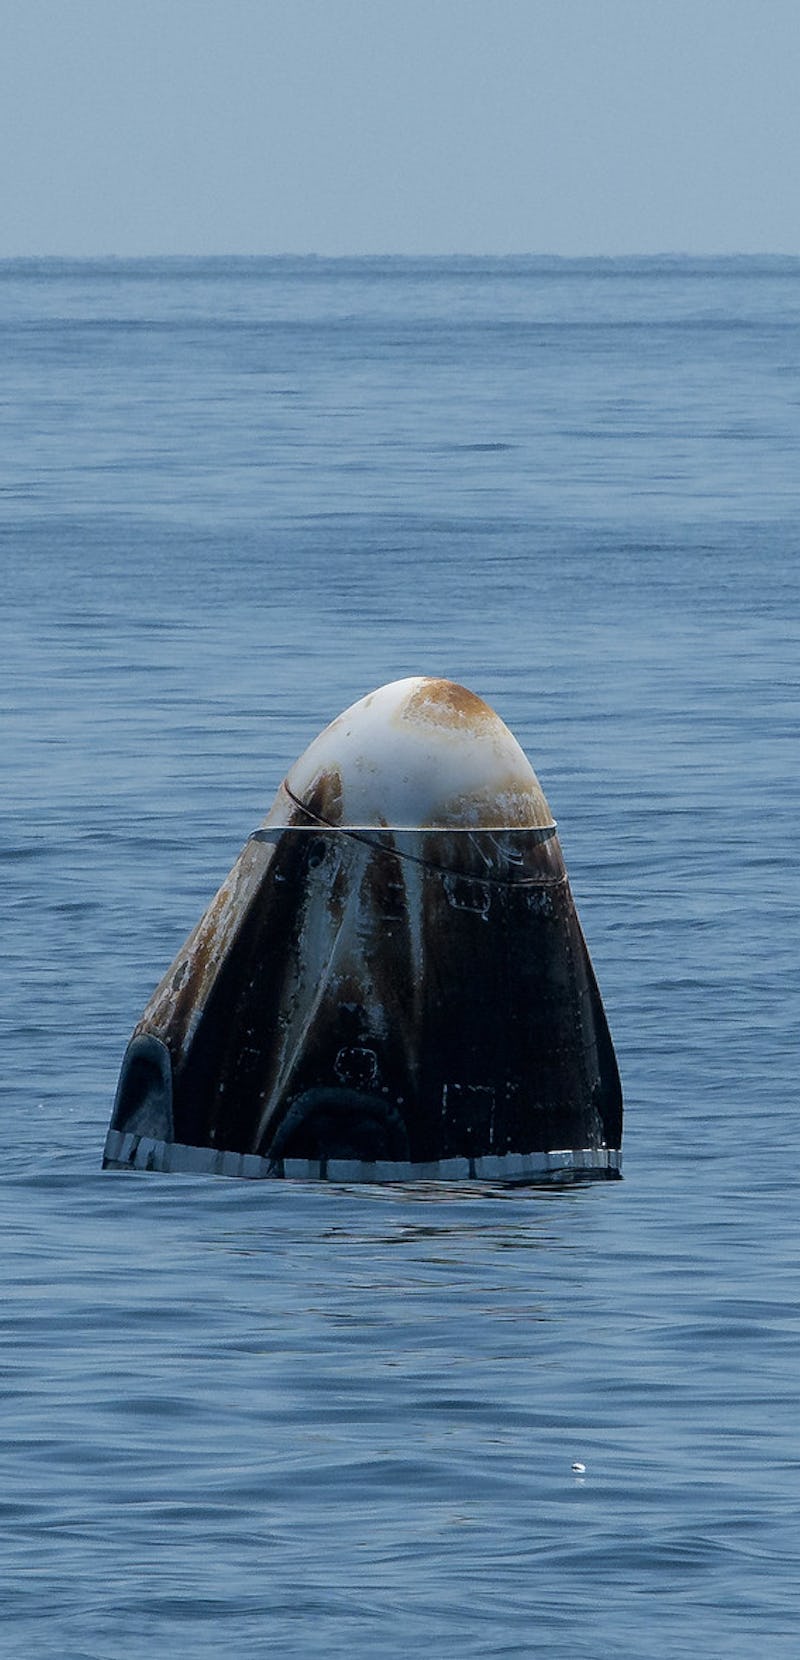 Space X’s Crew Dragon capsule in the Gulf of Mexico